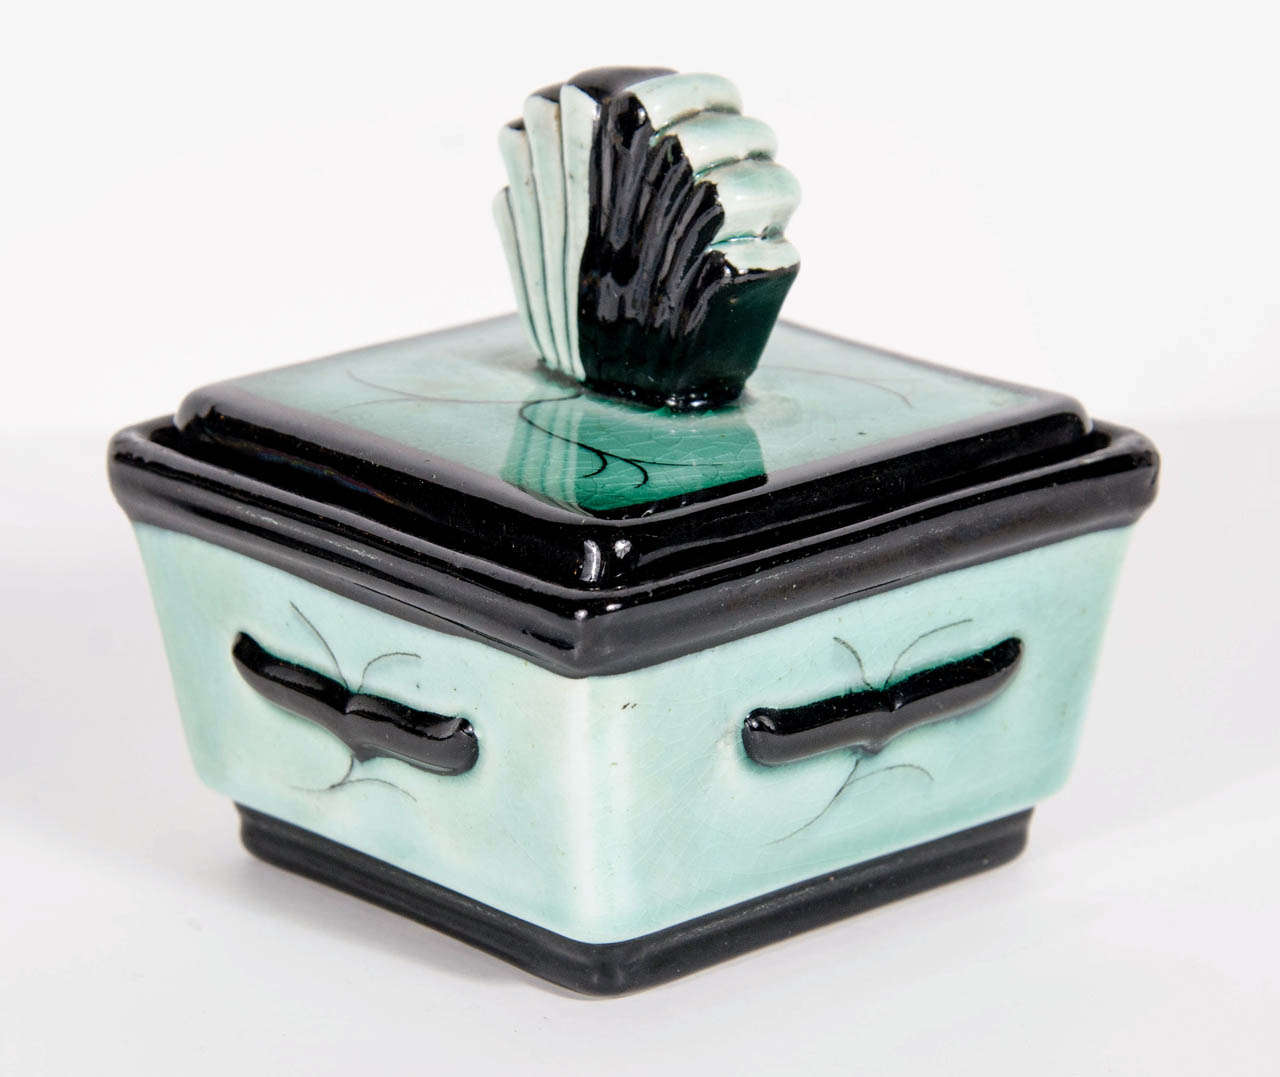 This exquisite square box with fan style lid by Ilse Claussen of Sweden in aqua blue green glaze has stylized hand painted Art Deco detailing. Signed on the bottom with Ilse Claussens initials as well as the Rorstrand hallmark. Ilse Claussen worked